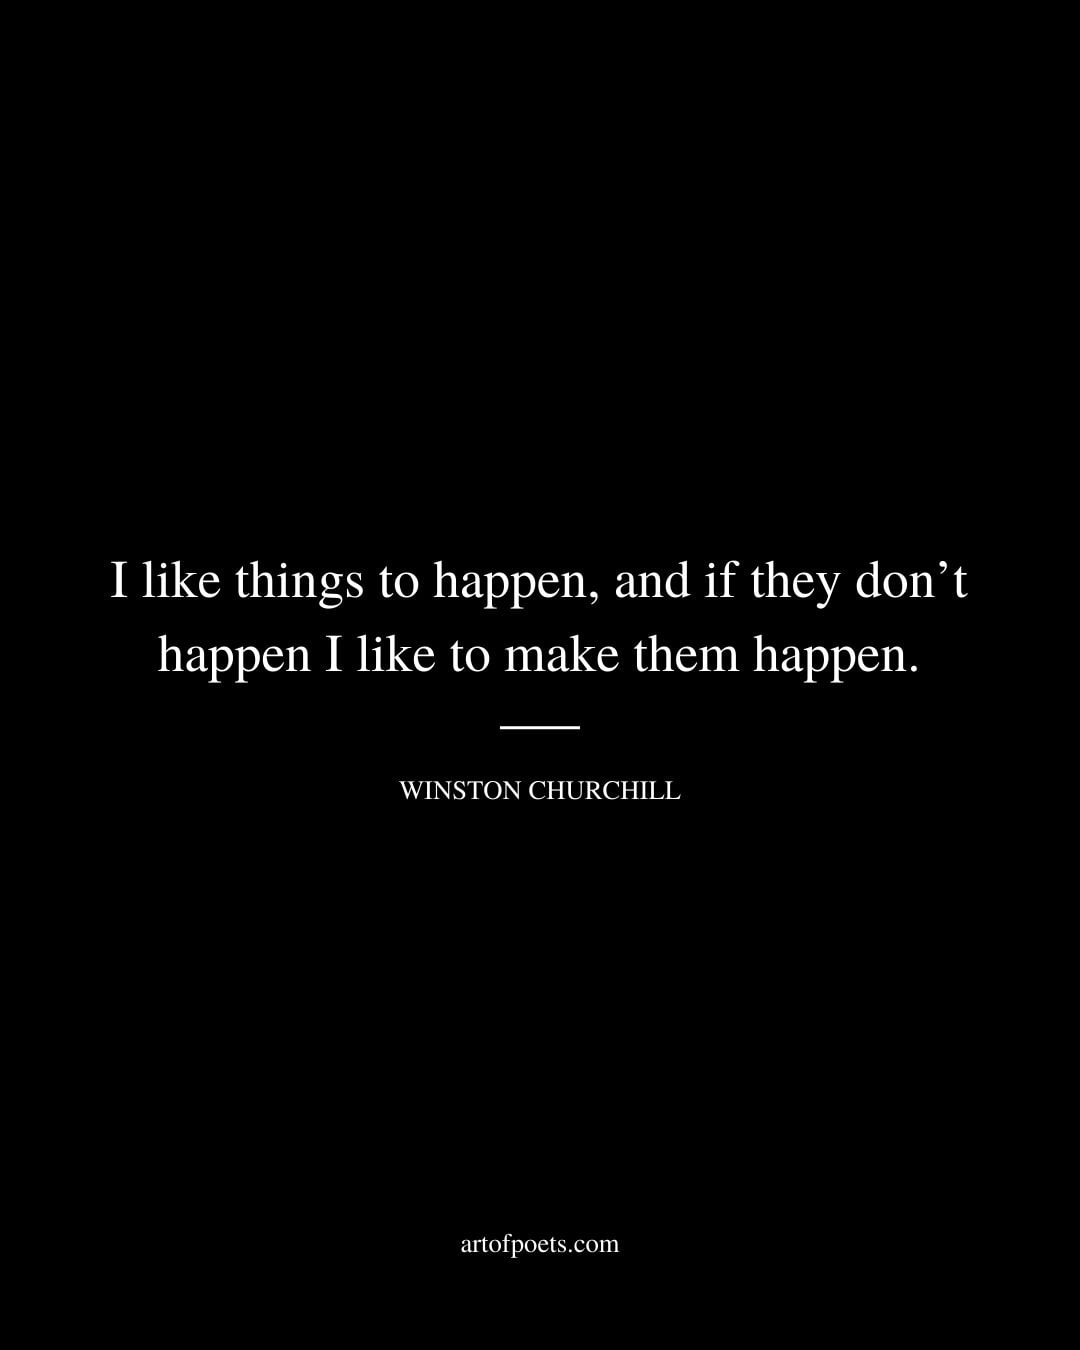 I like things to happen and if they dont happen I like to make them happen